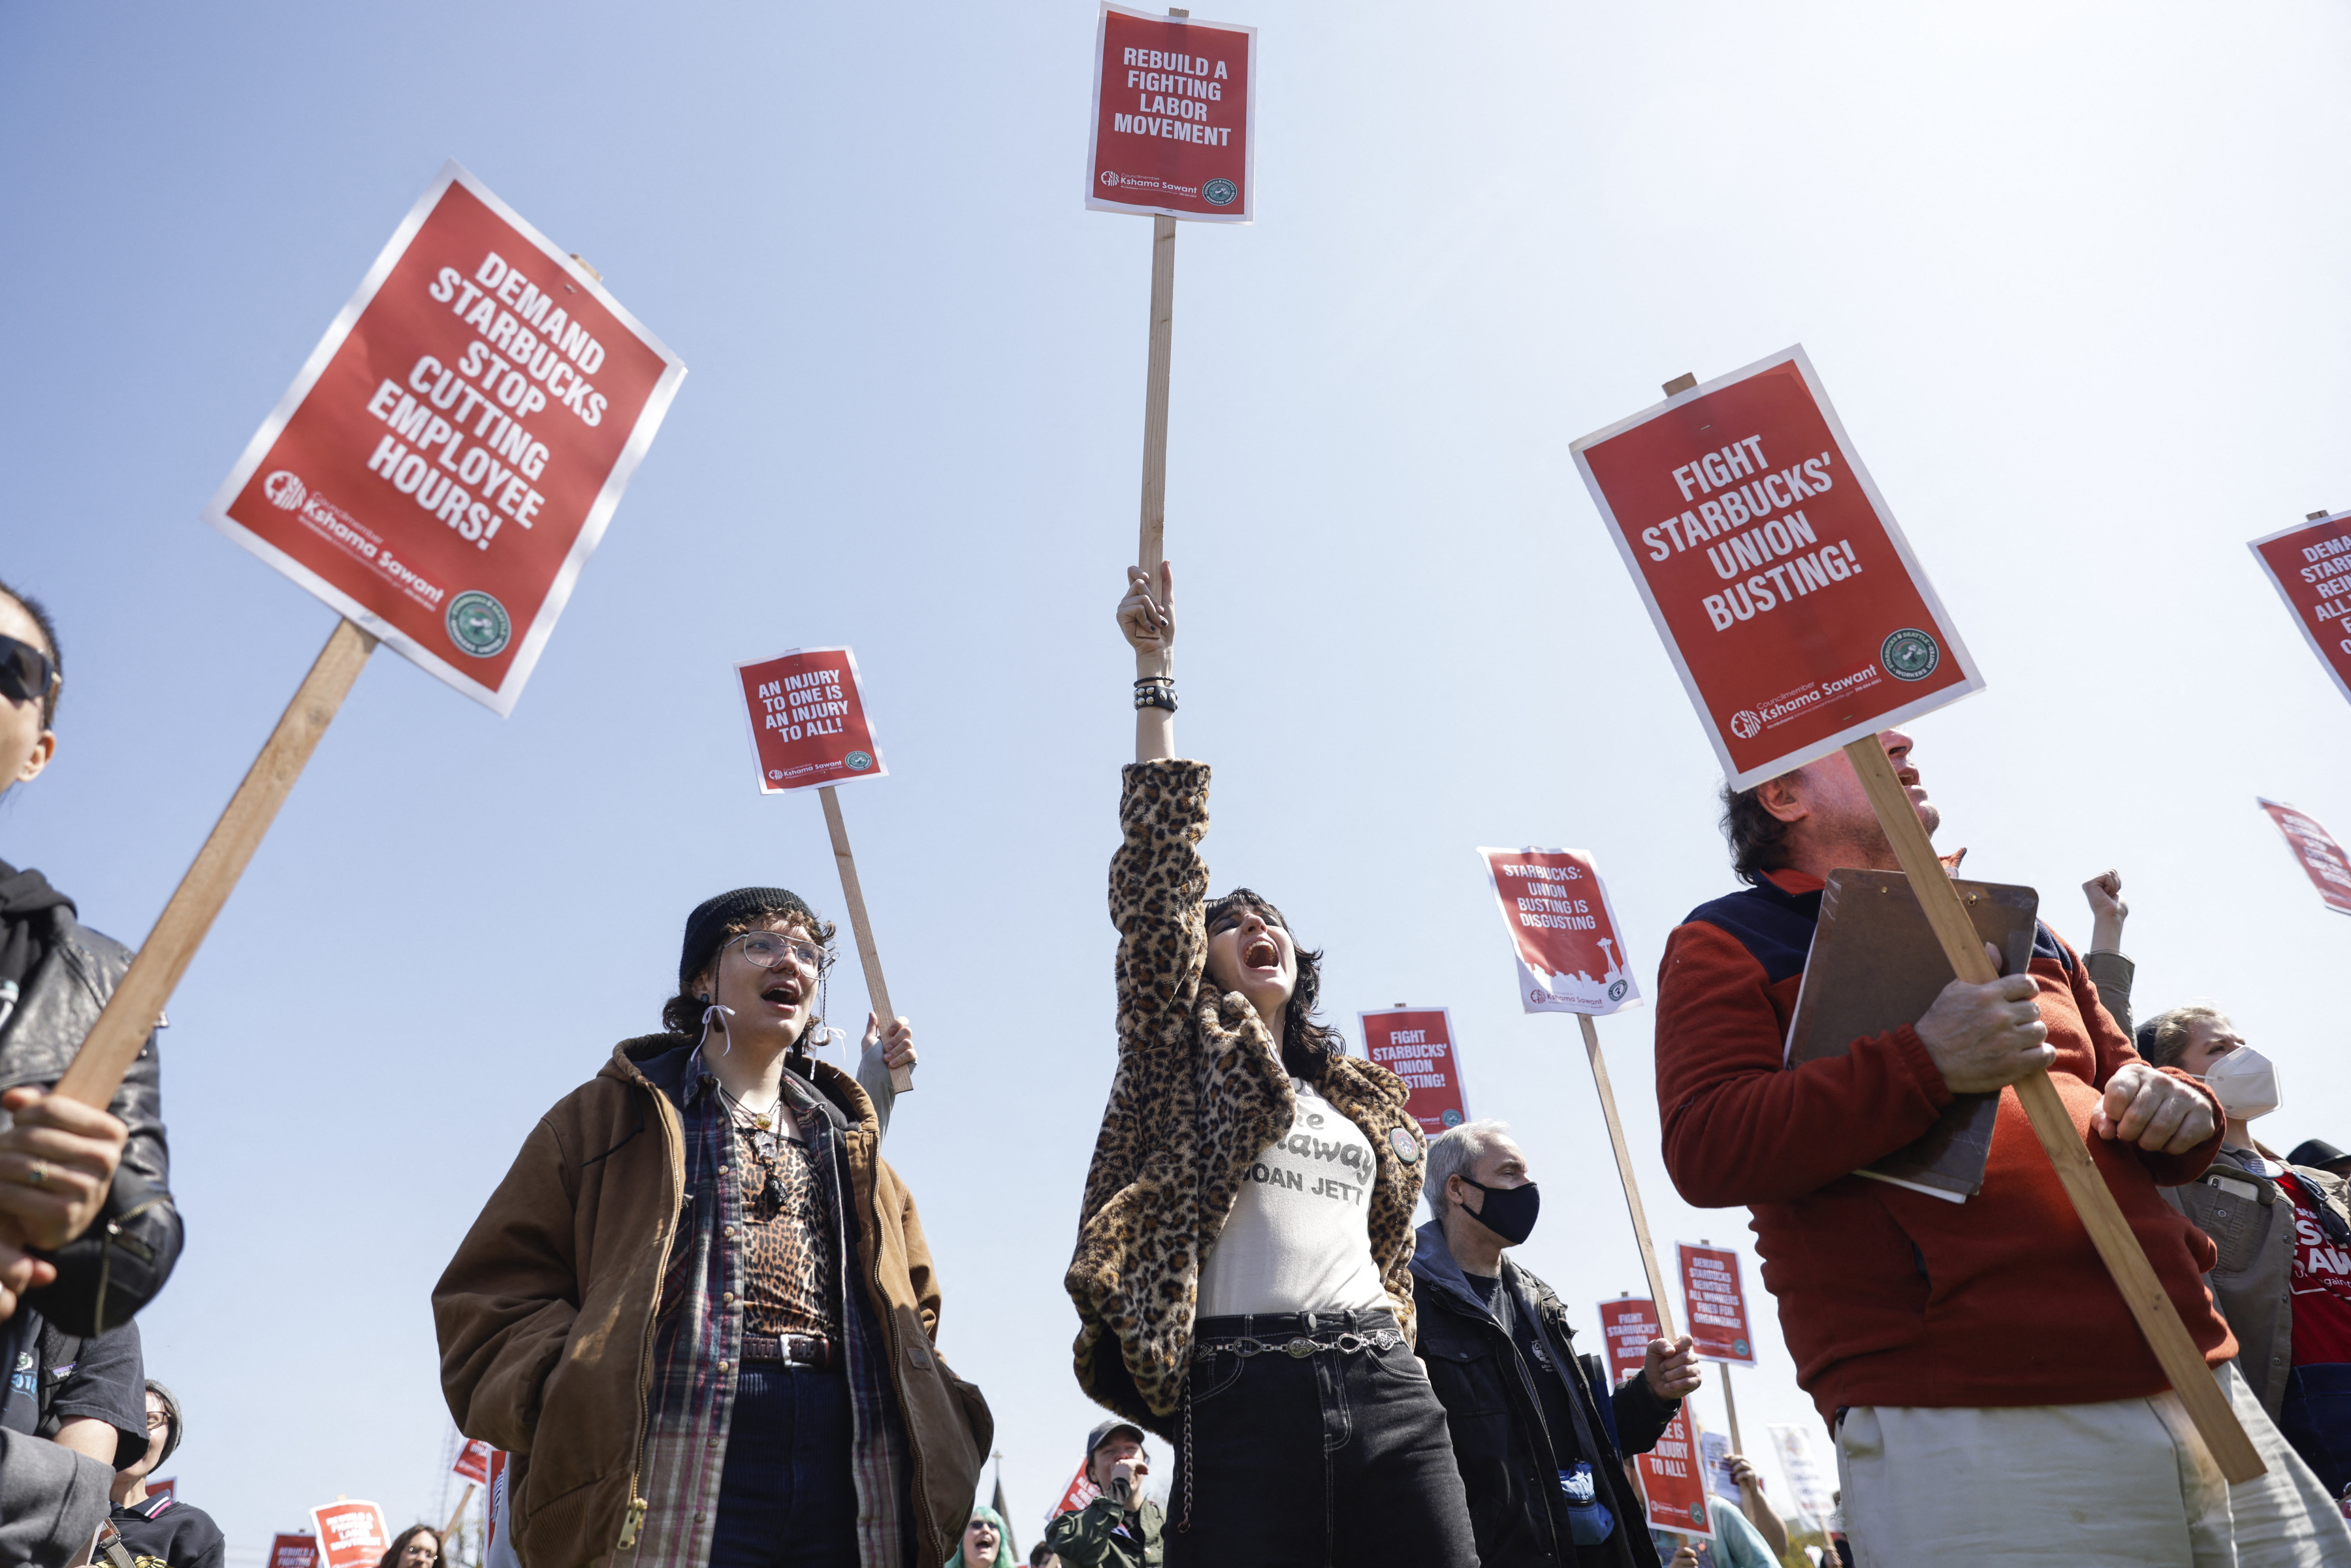 A crowd of people march while carrying picket signs in support of unionizing.